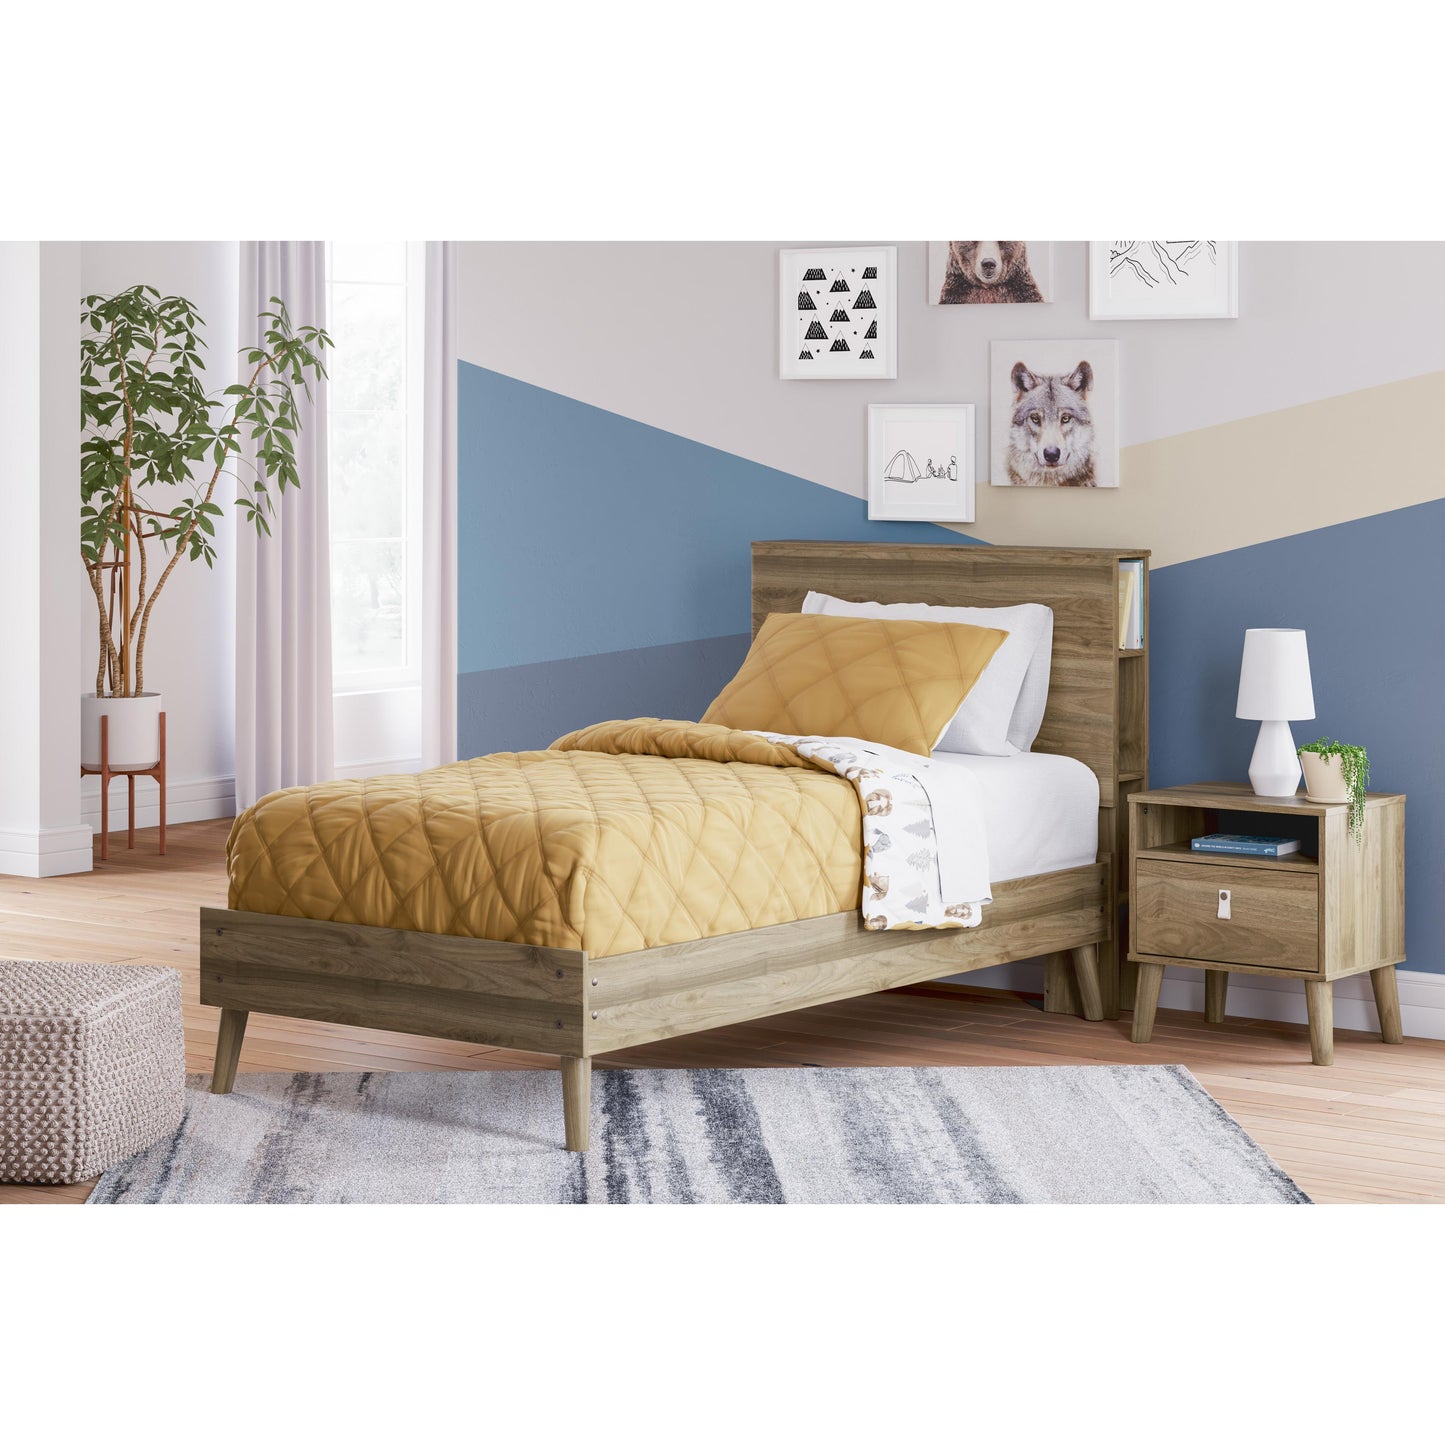 Signature Design by Ashley Kids Beds Bed EB1187-163/EB1187-111 IMAGE 5